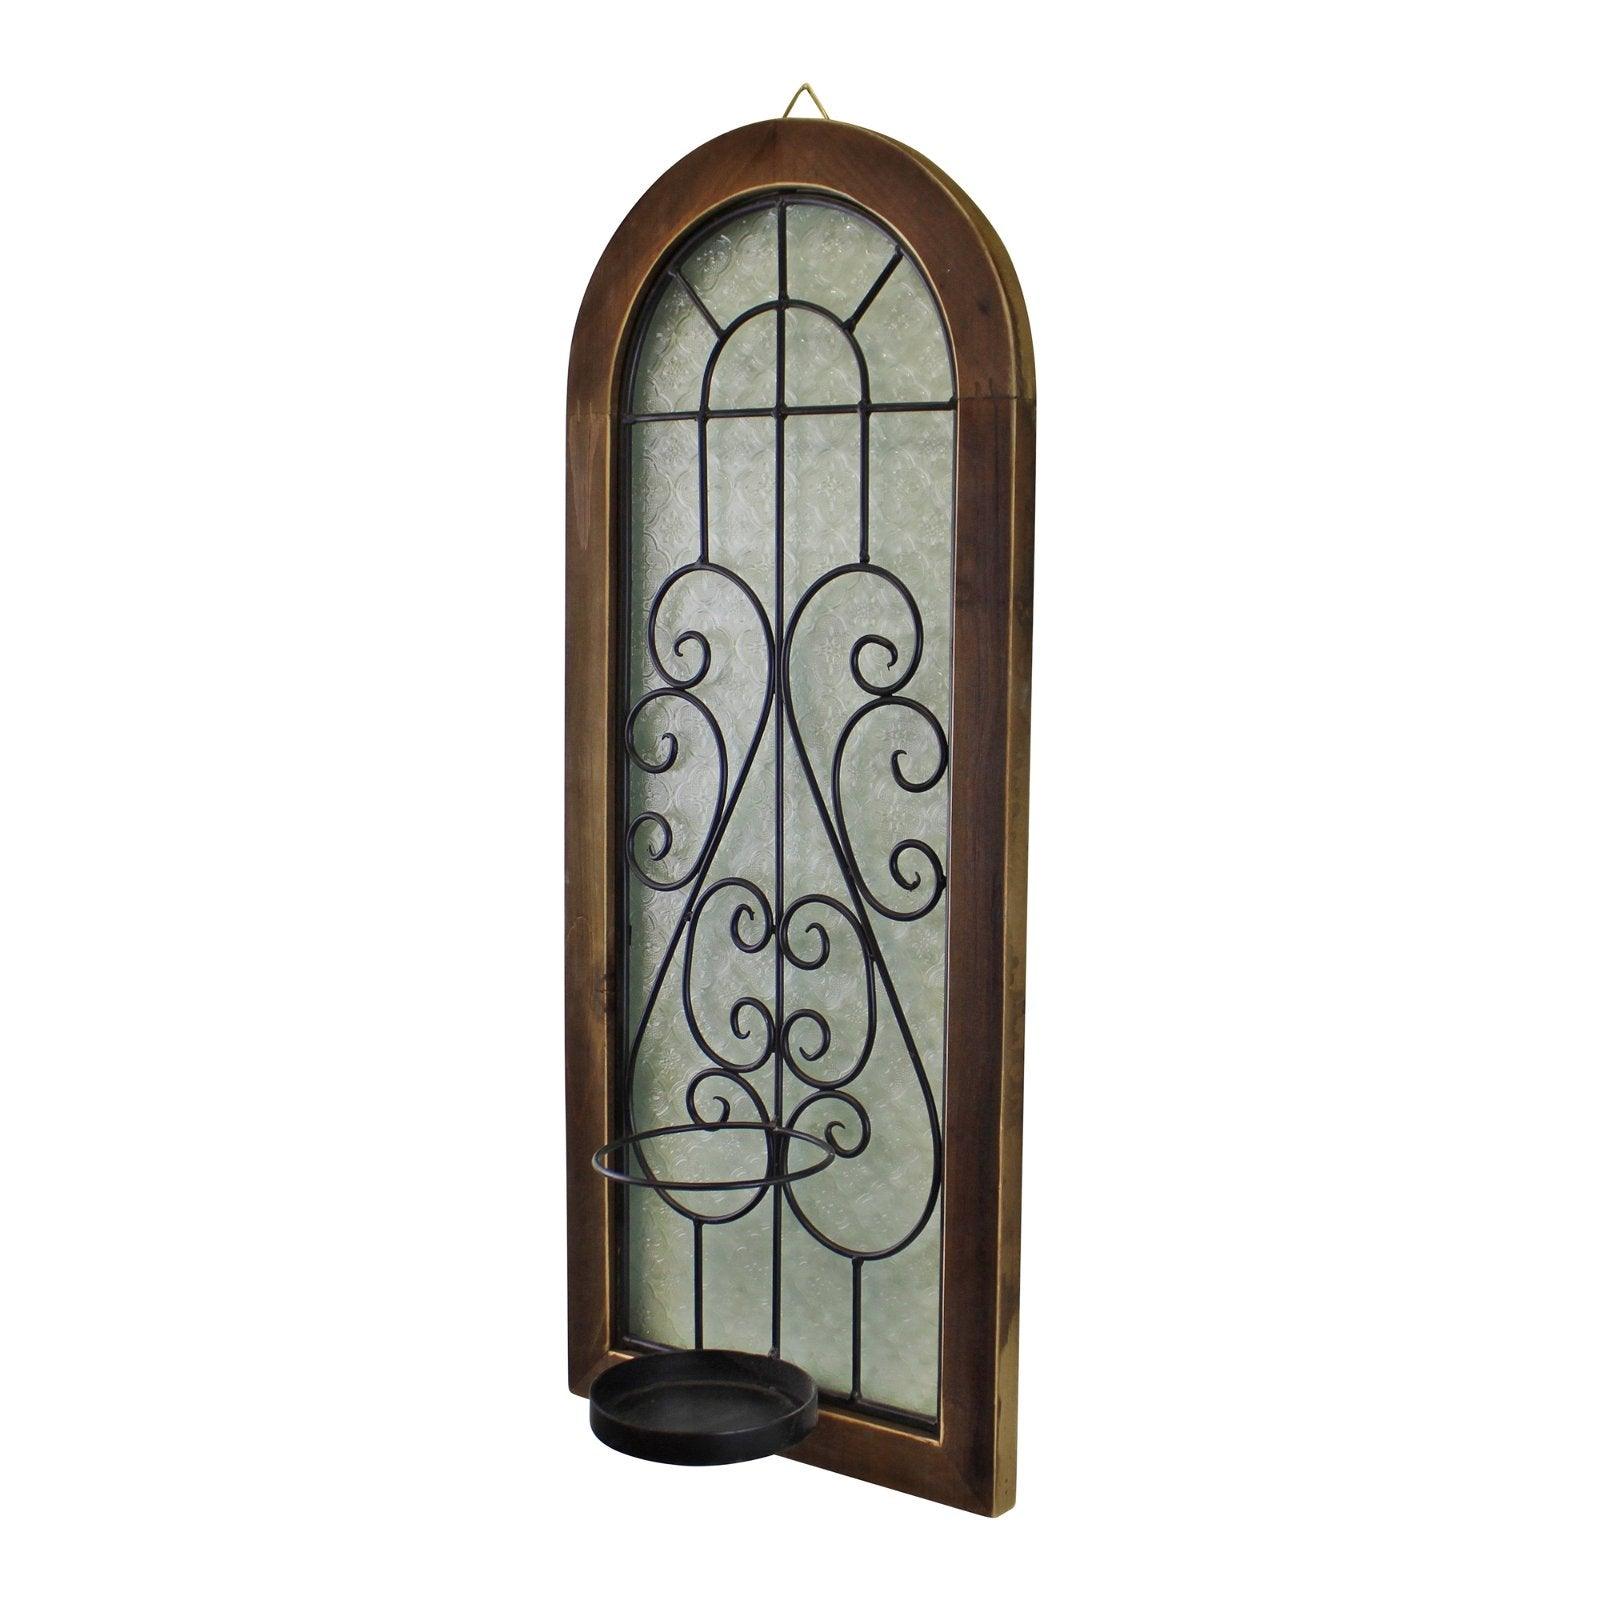 View Candle Wall Sconce Arched Design information